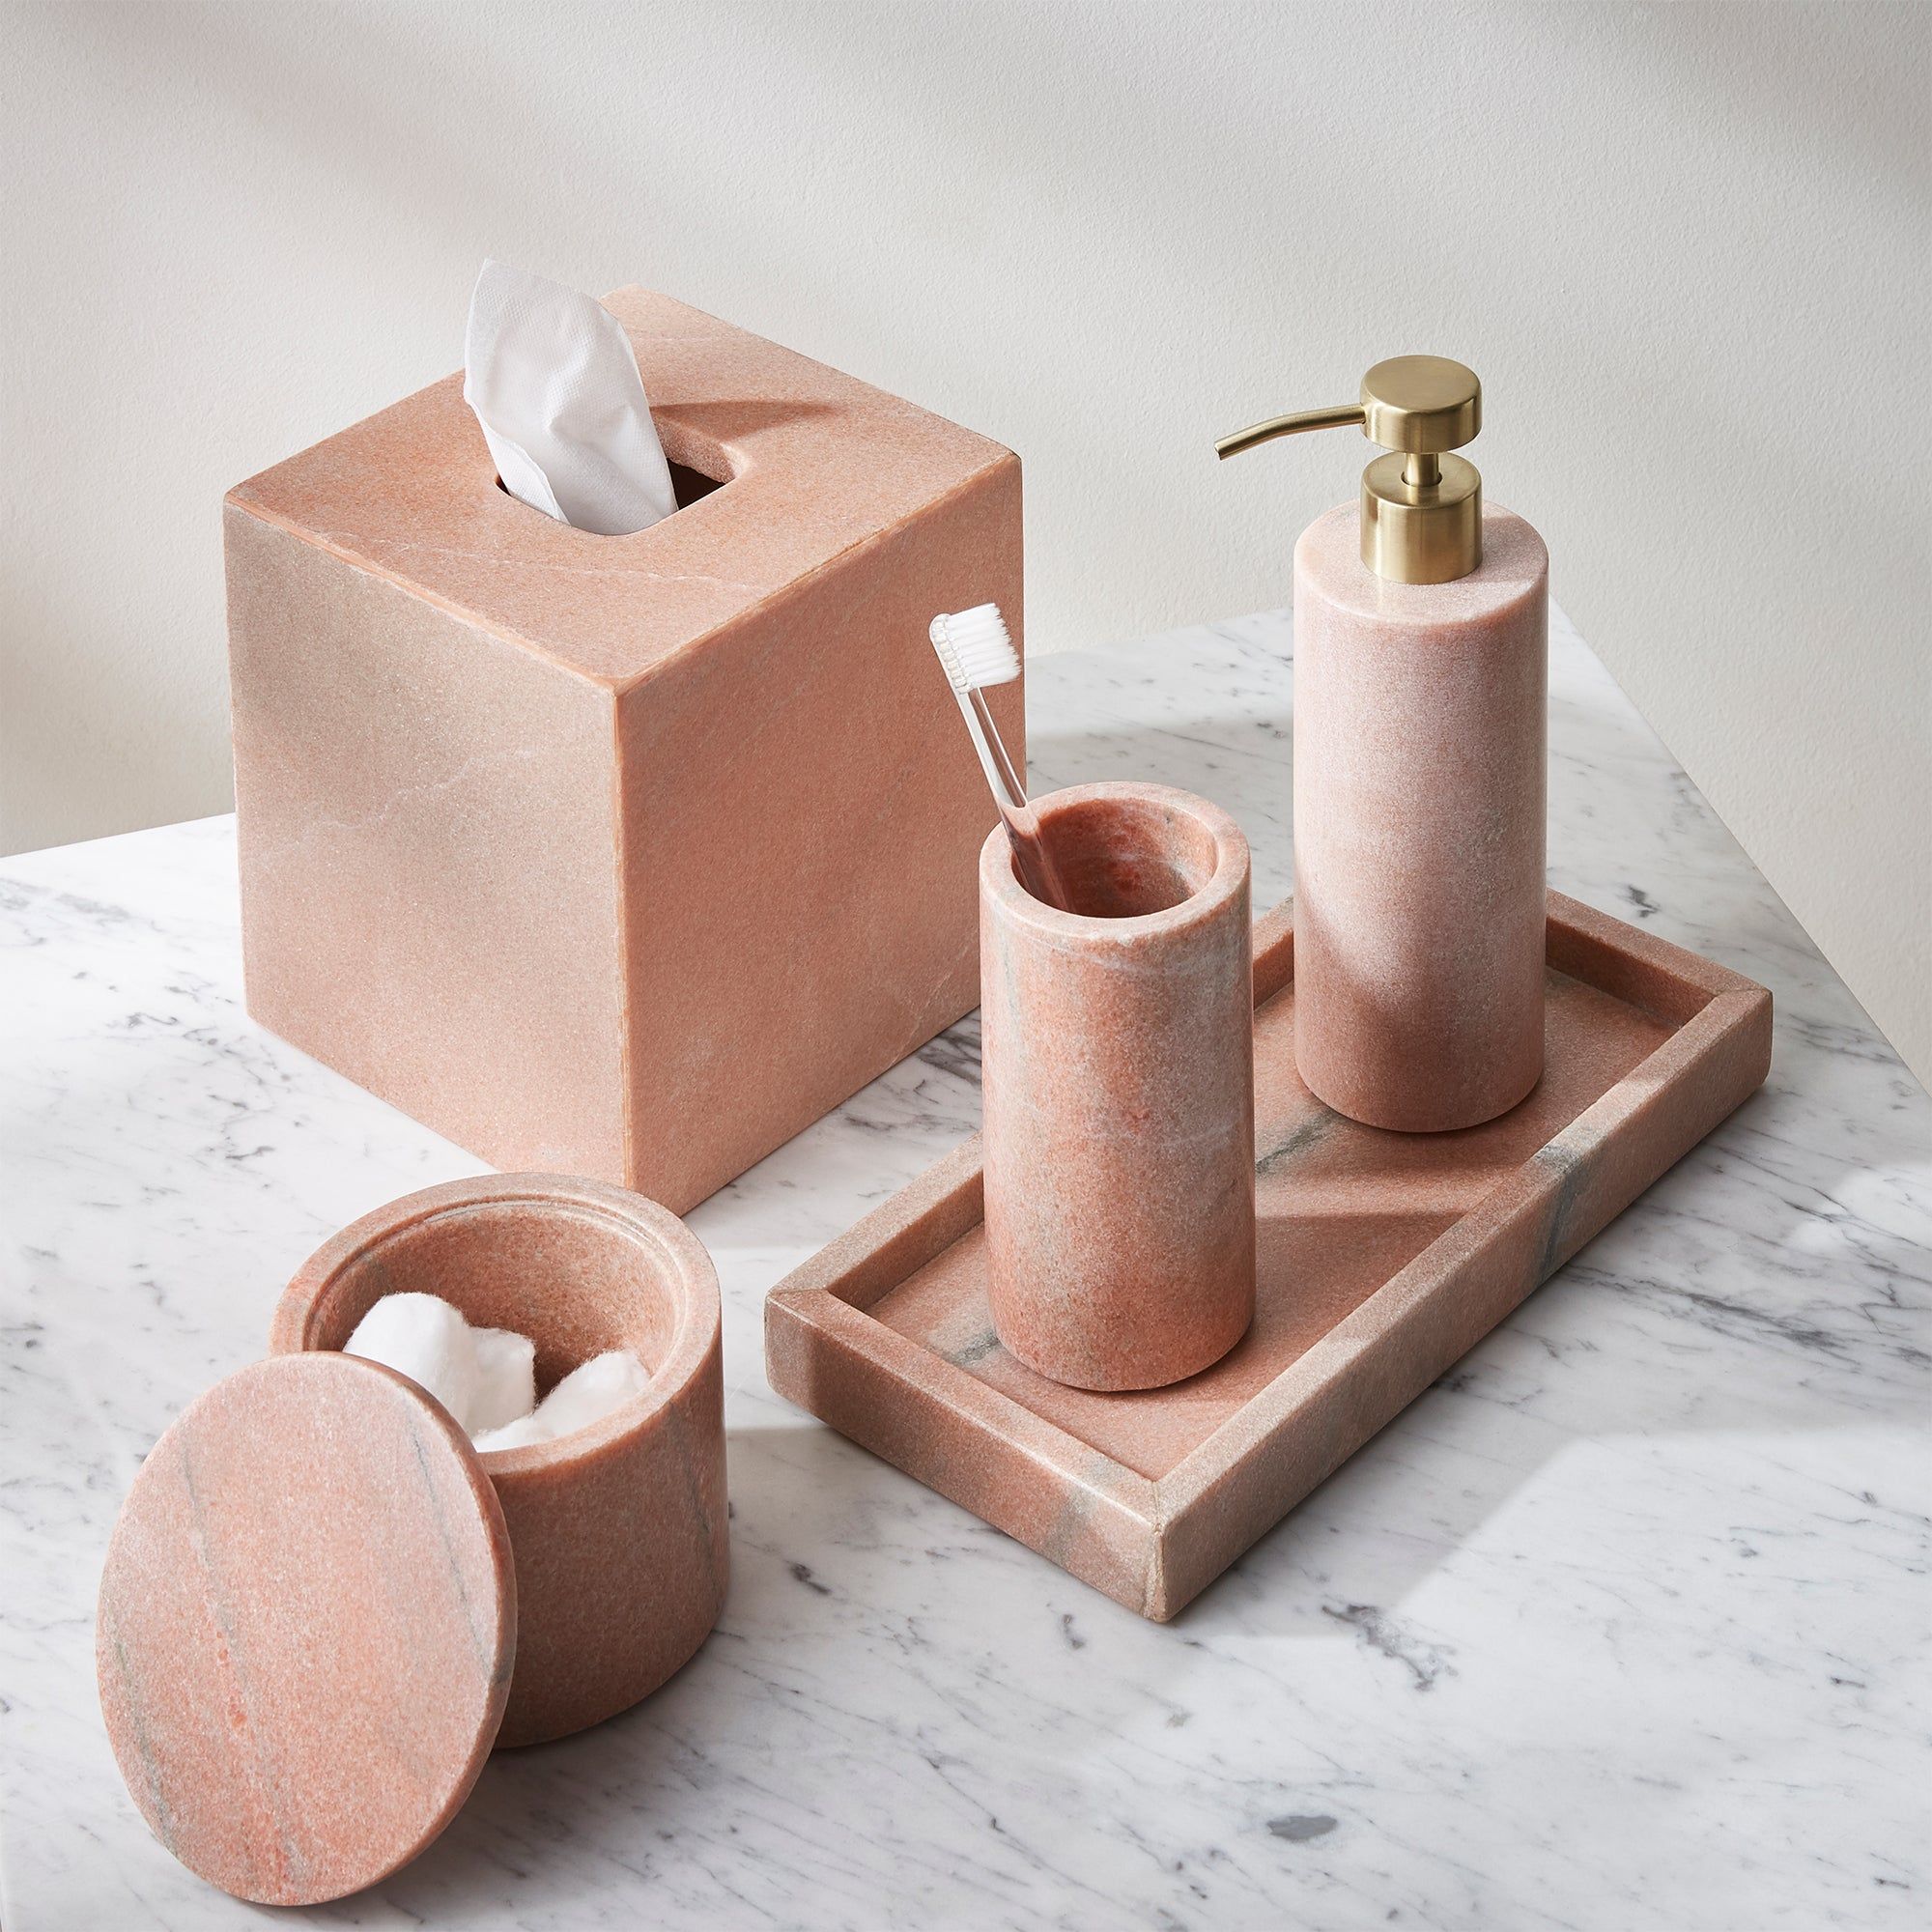 Elegant Marble Bathroom Accessories Set for Your Luxurious Space